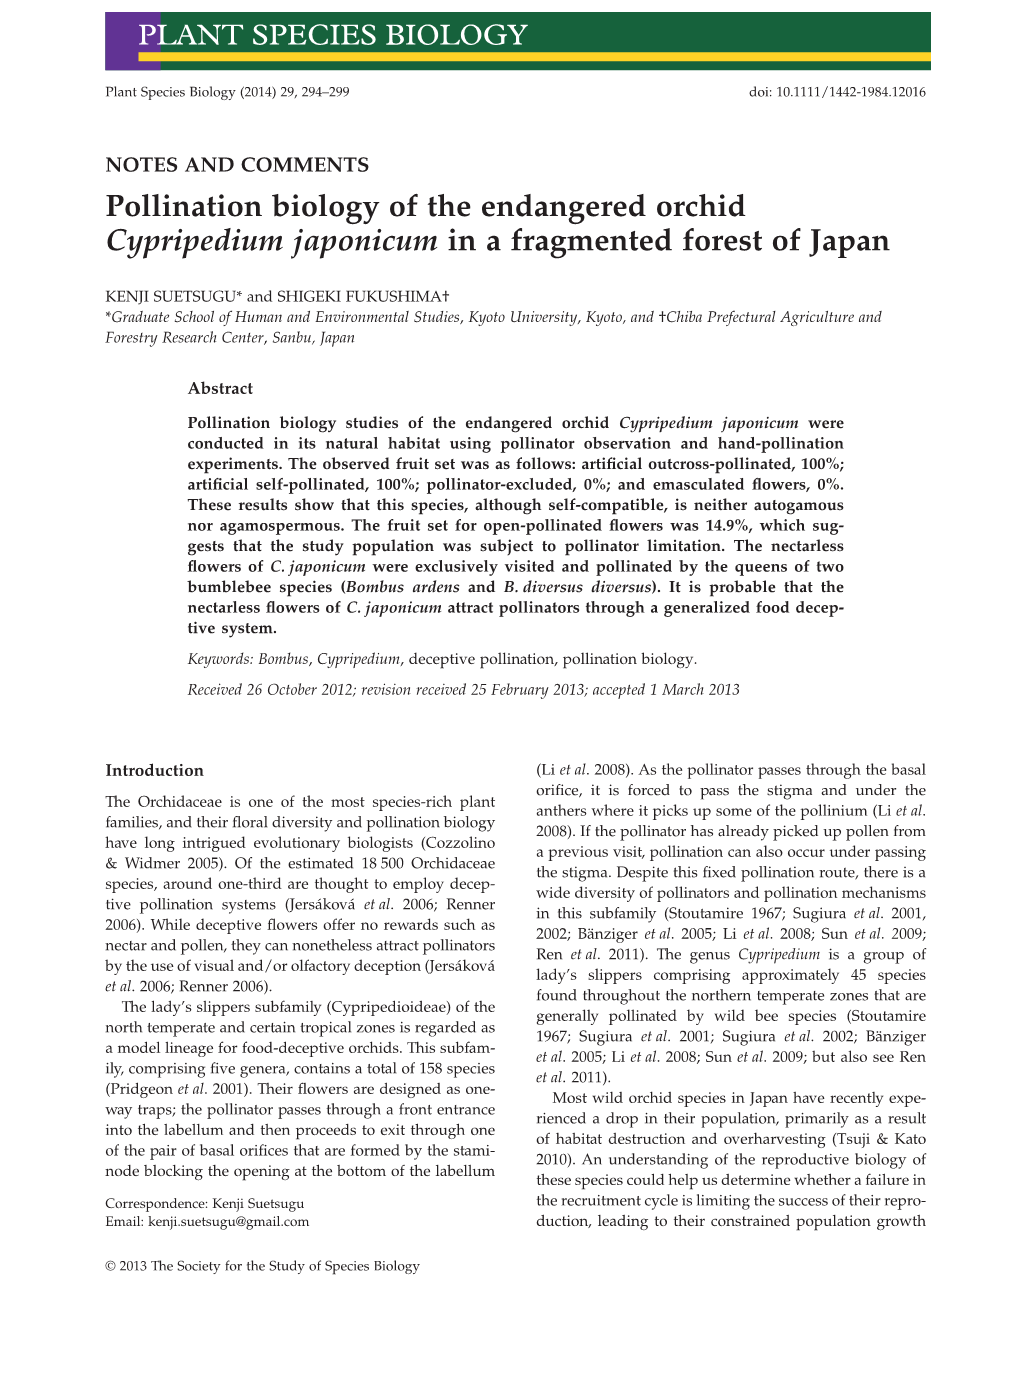 Pollination Biology of the Endangered Orchid Cypripedium Japonicum in a Fragmented Forest of Japan